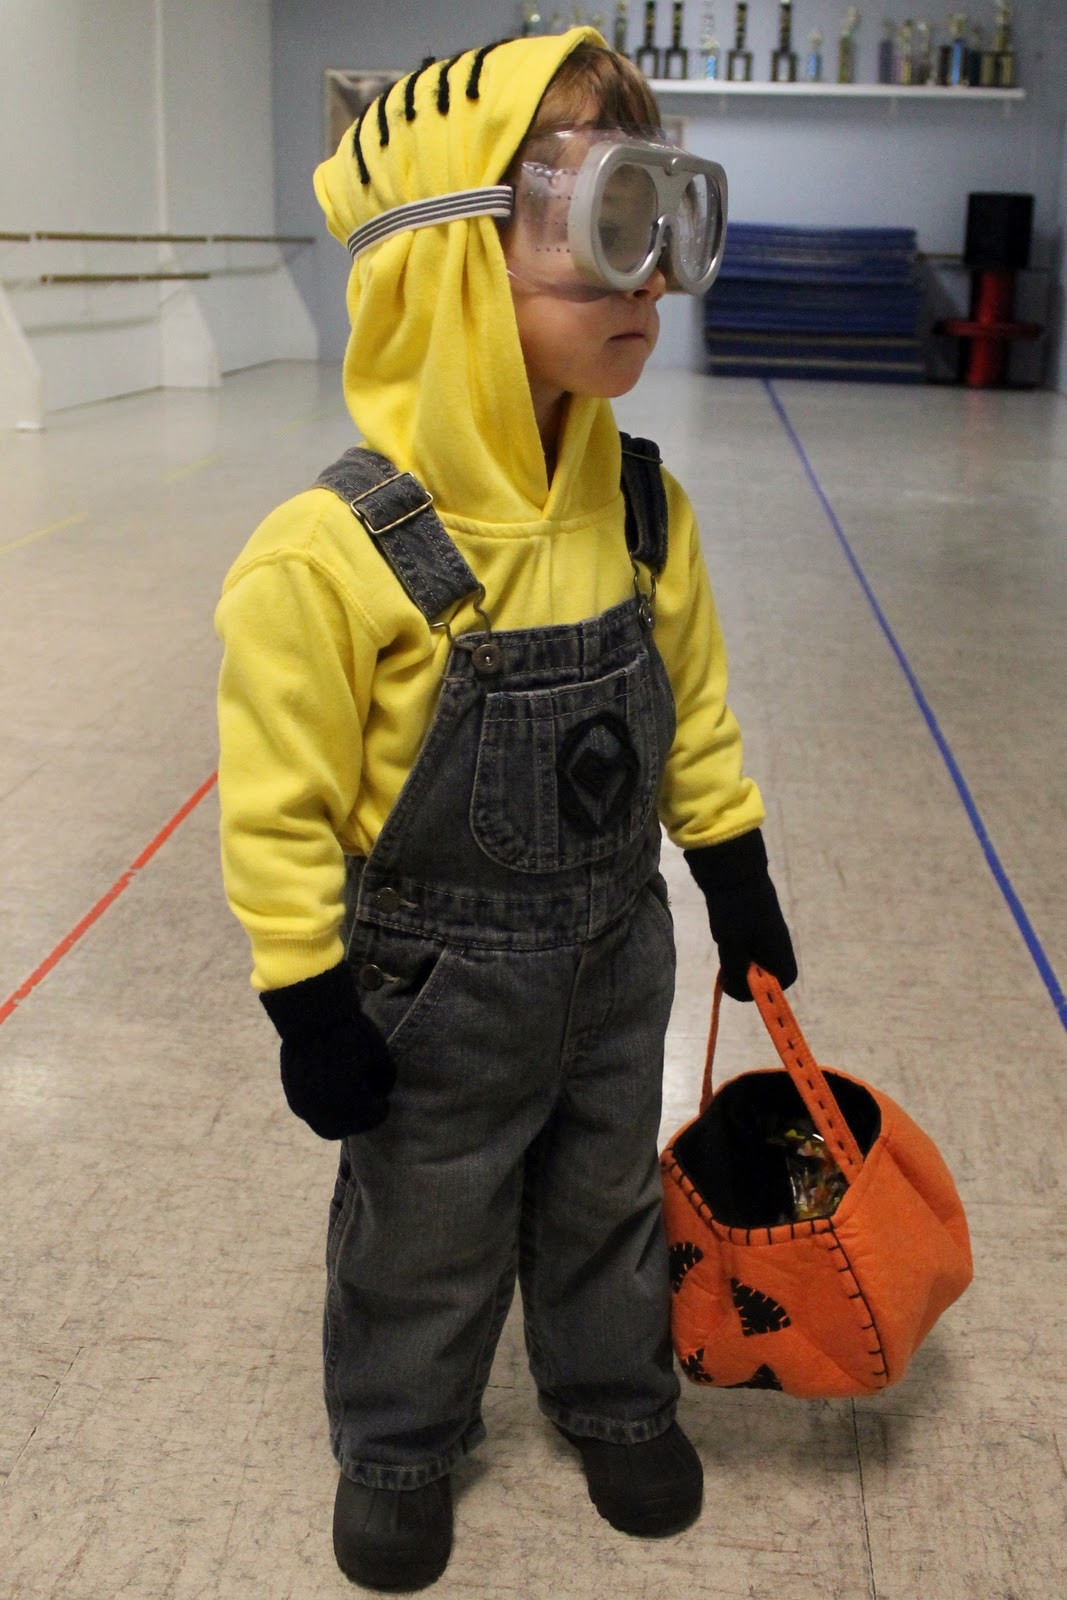 DIY Minion Costume For Kids
 25 Minions Halloween Costume Ideas To Look Cute And Funny